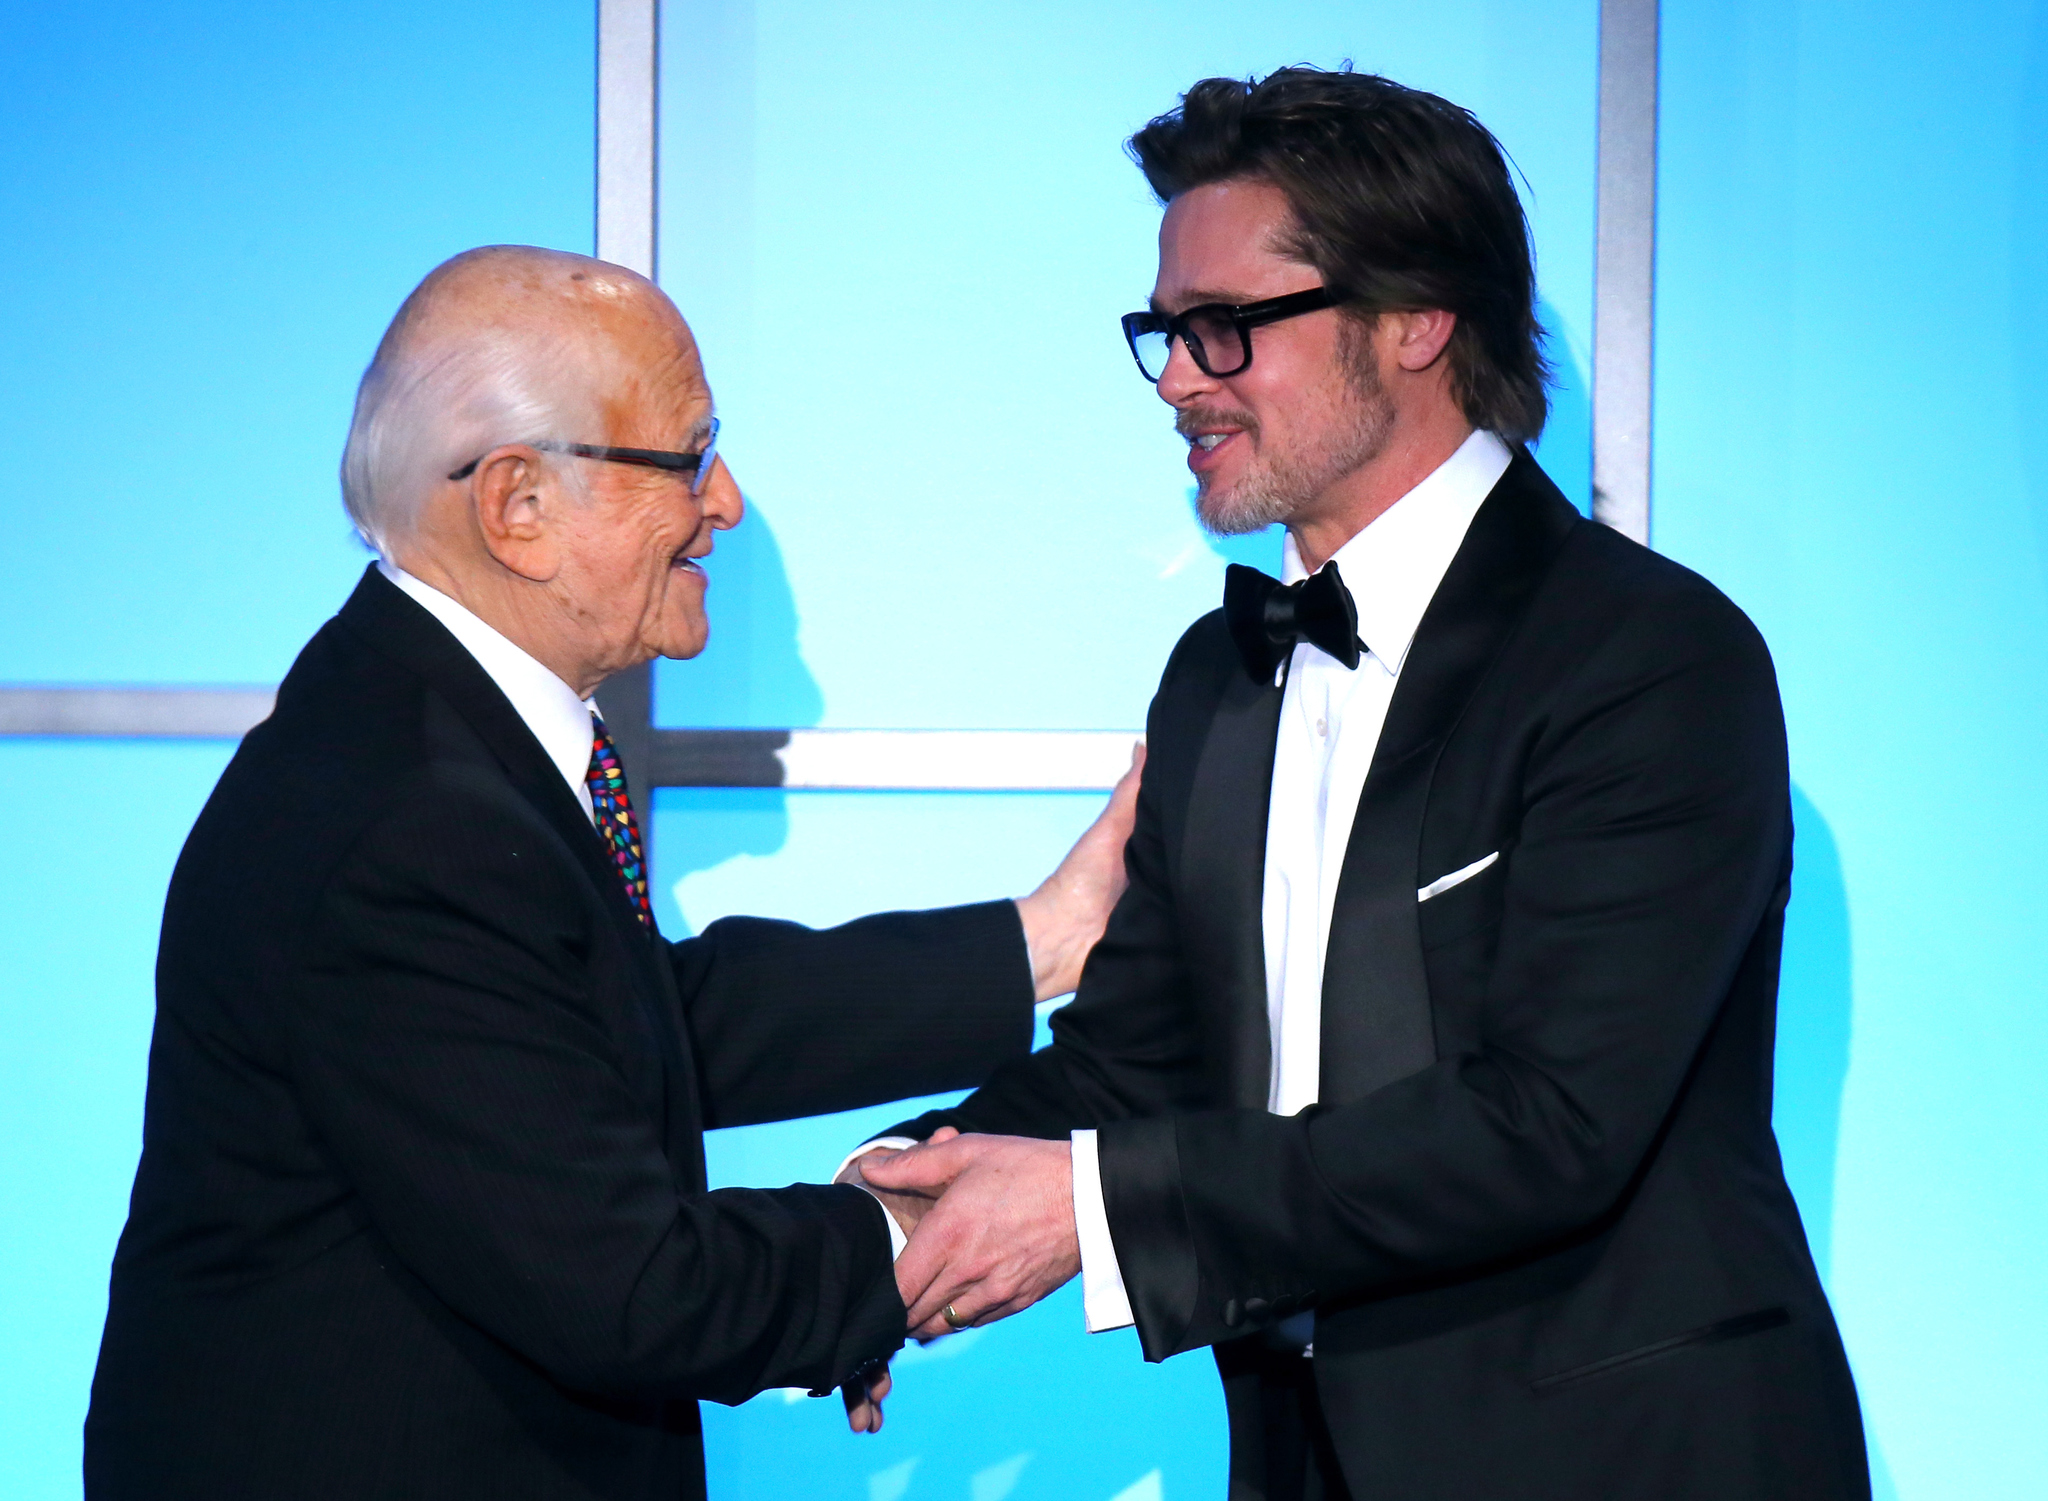 Brad Pitt and Norman Lear